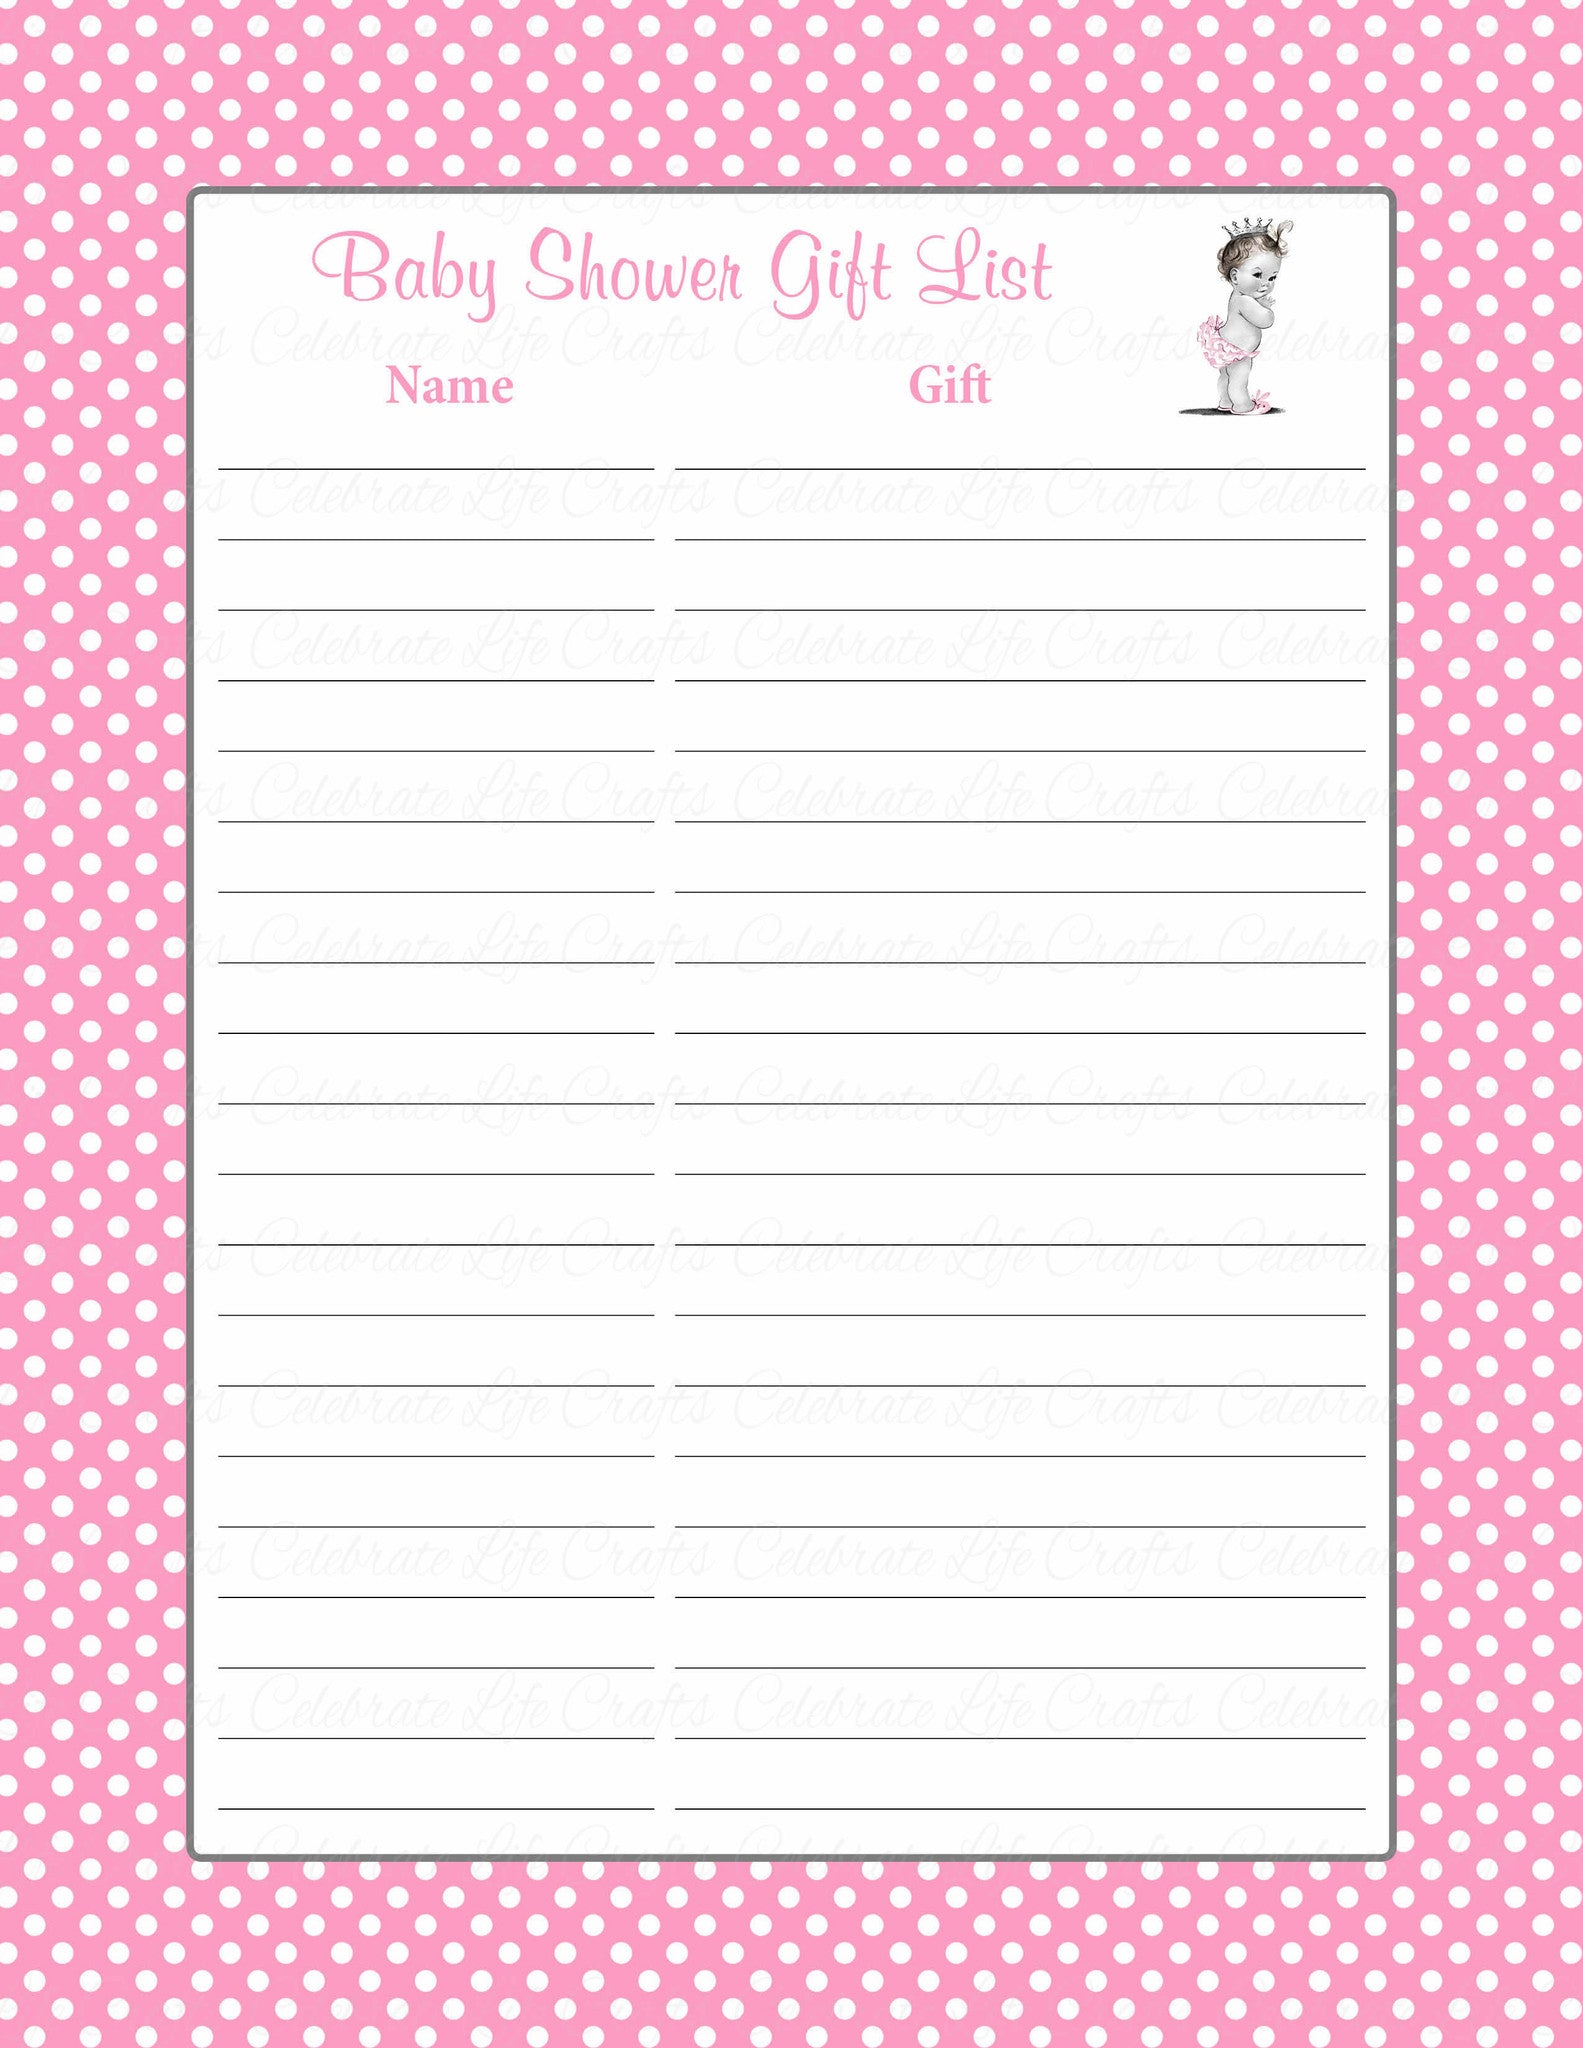 list of baby shower gifts